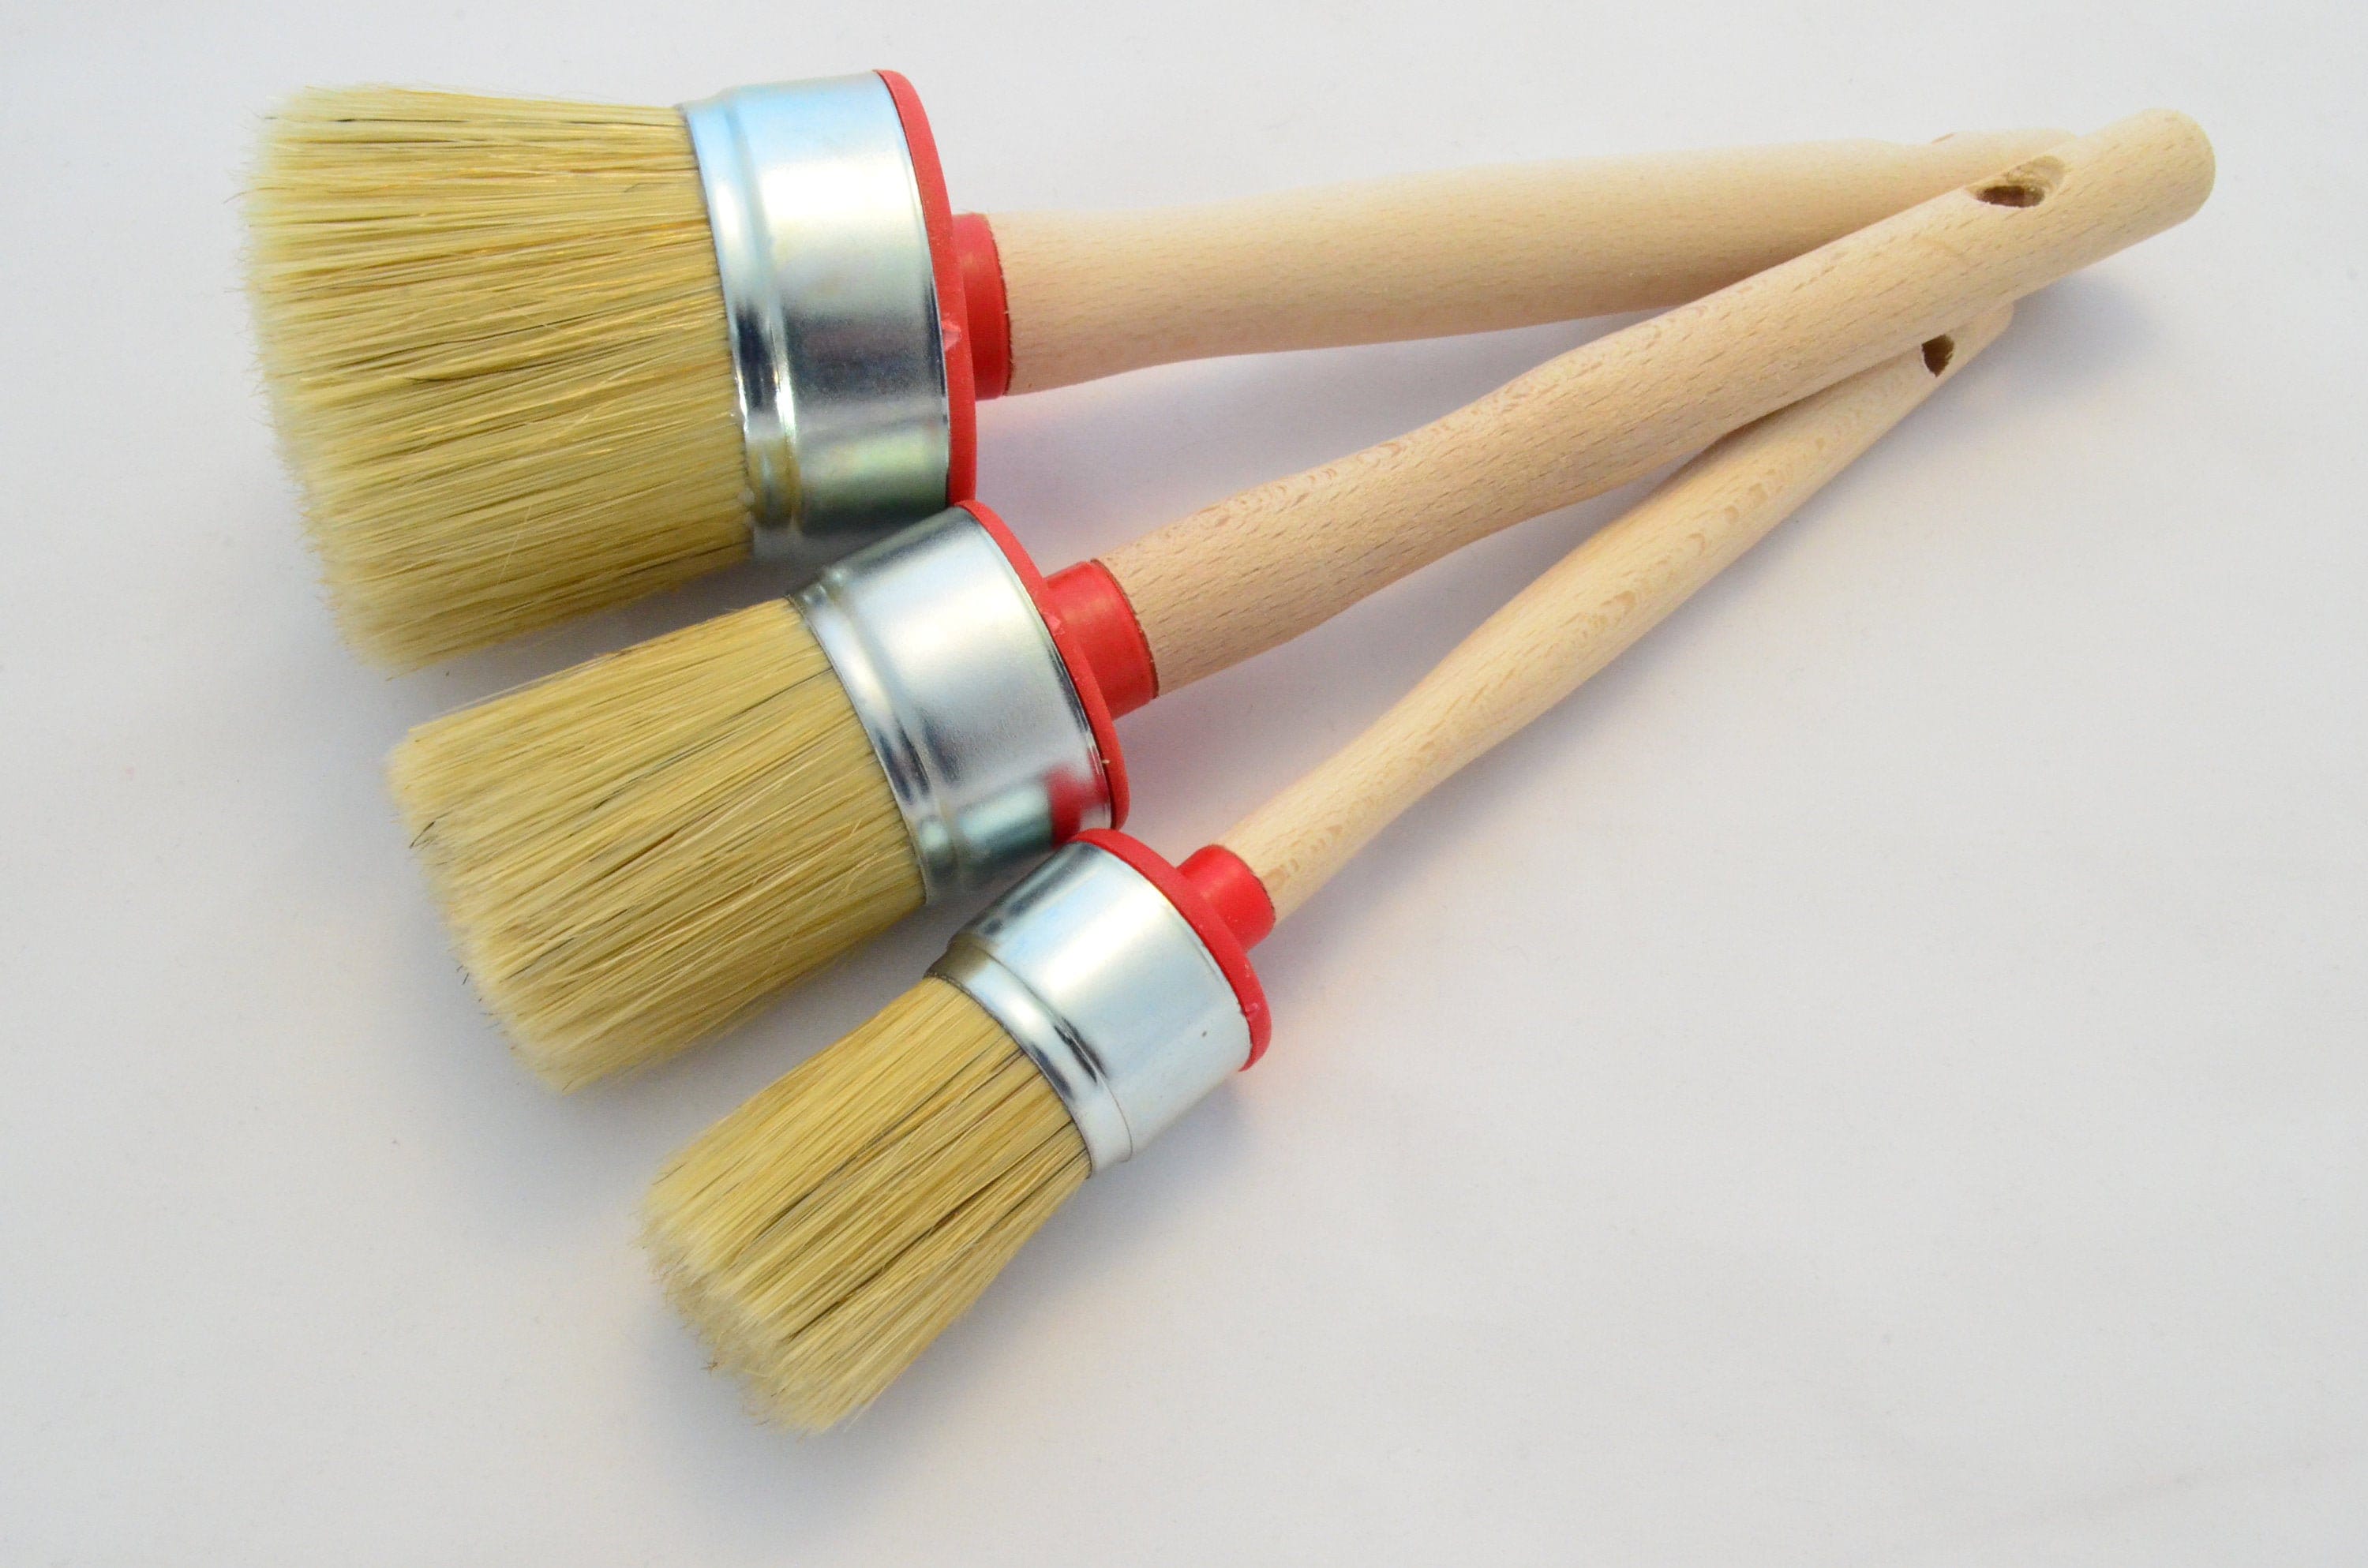 4 inch European Professional Stain Block Paint Brush - Natural Bristle Wooden Handle - for Acrylic, Chalk, Oil, Watercolor, Gouache, Stain, Varnish